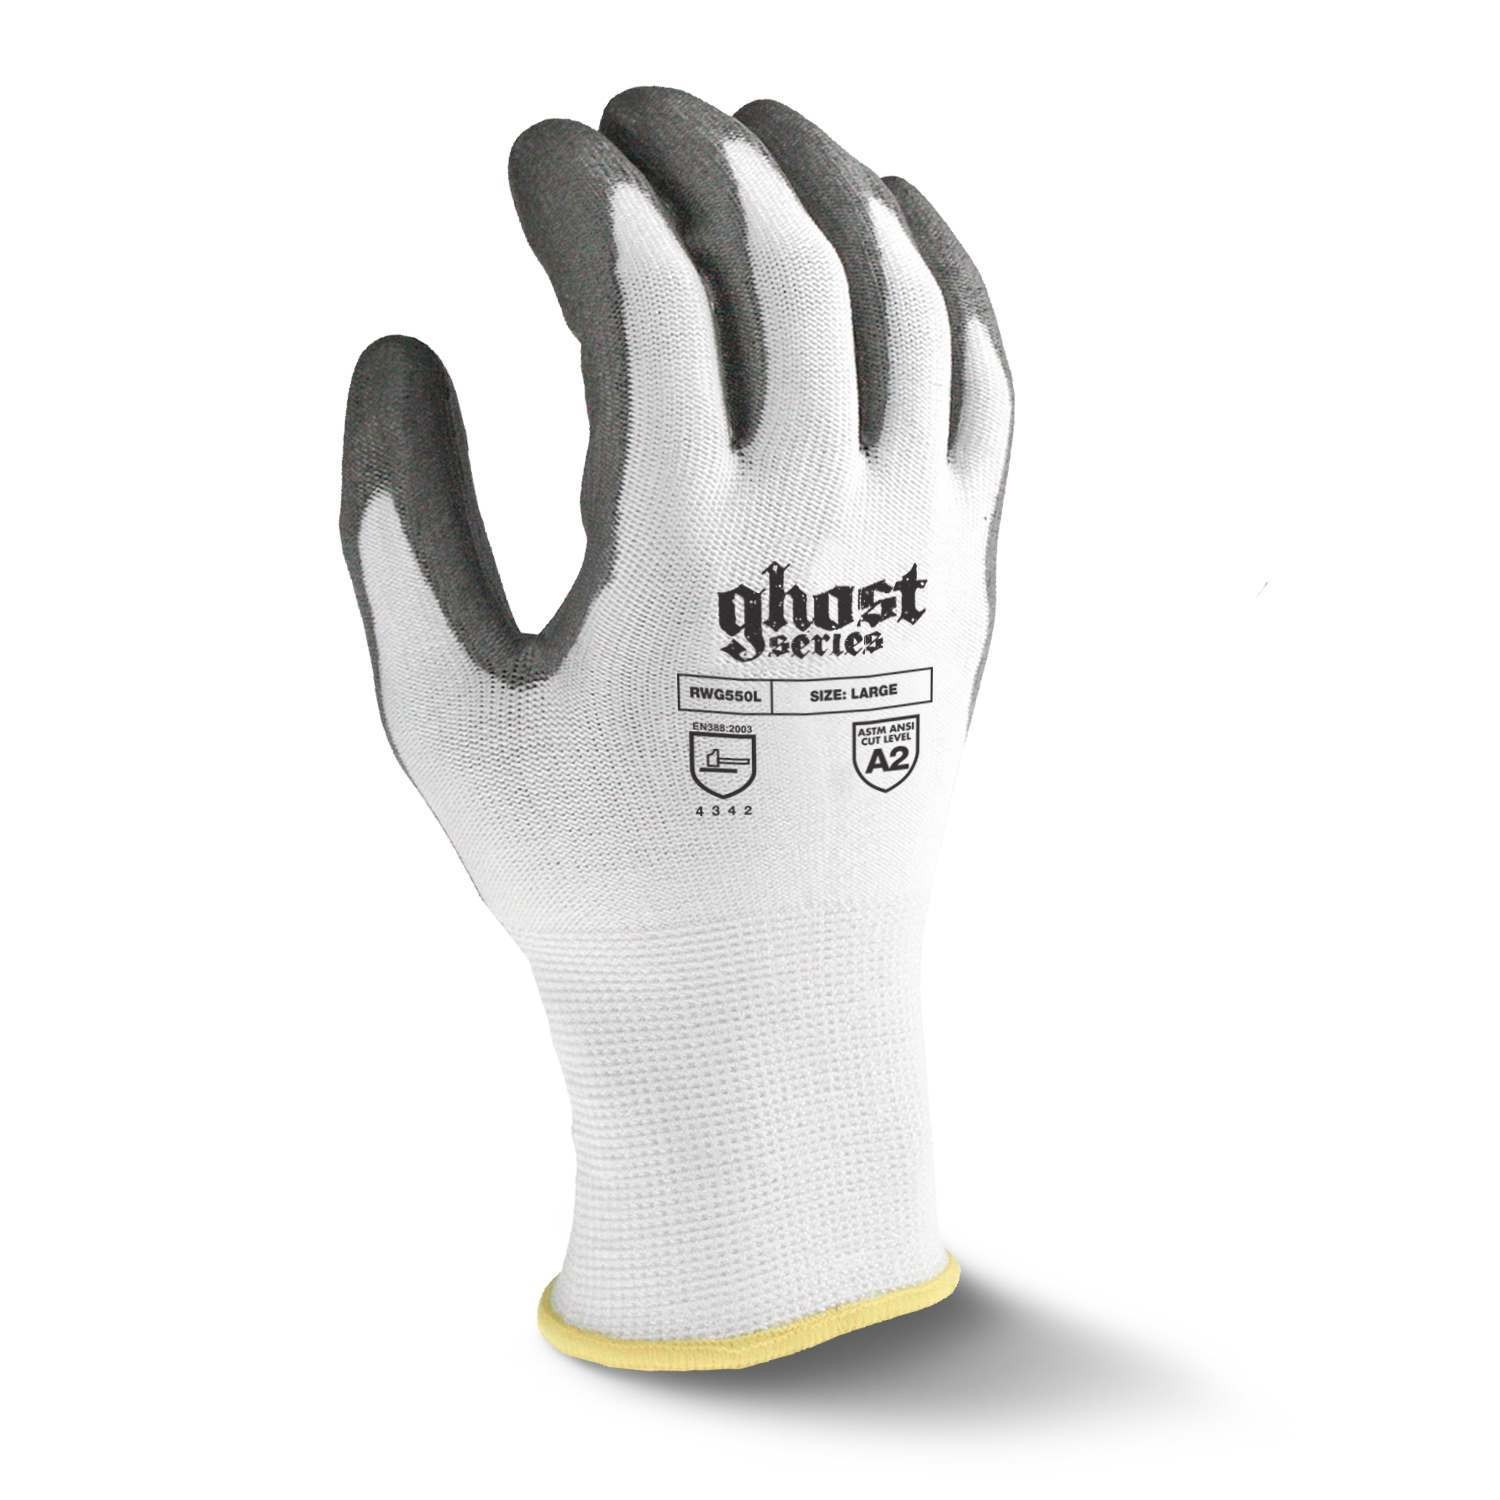 Radians RWG550 Ghost™ Series Cut Protection Level 3 Work Glove 